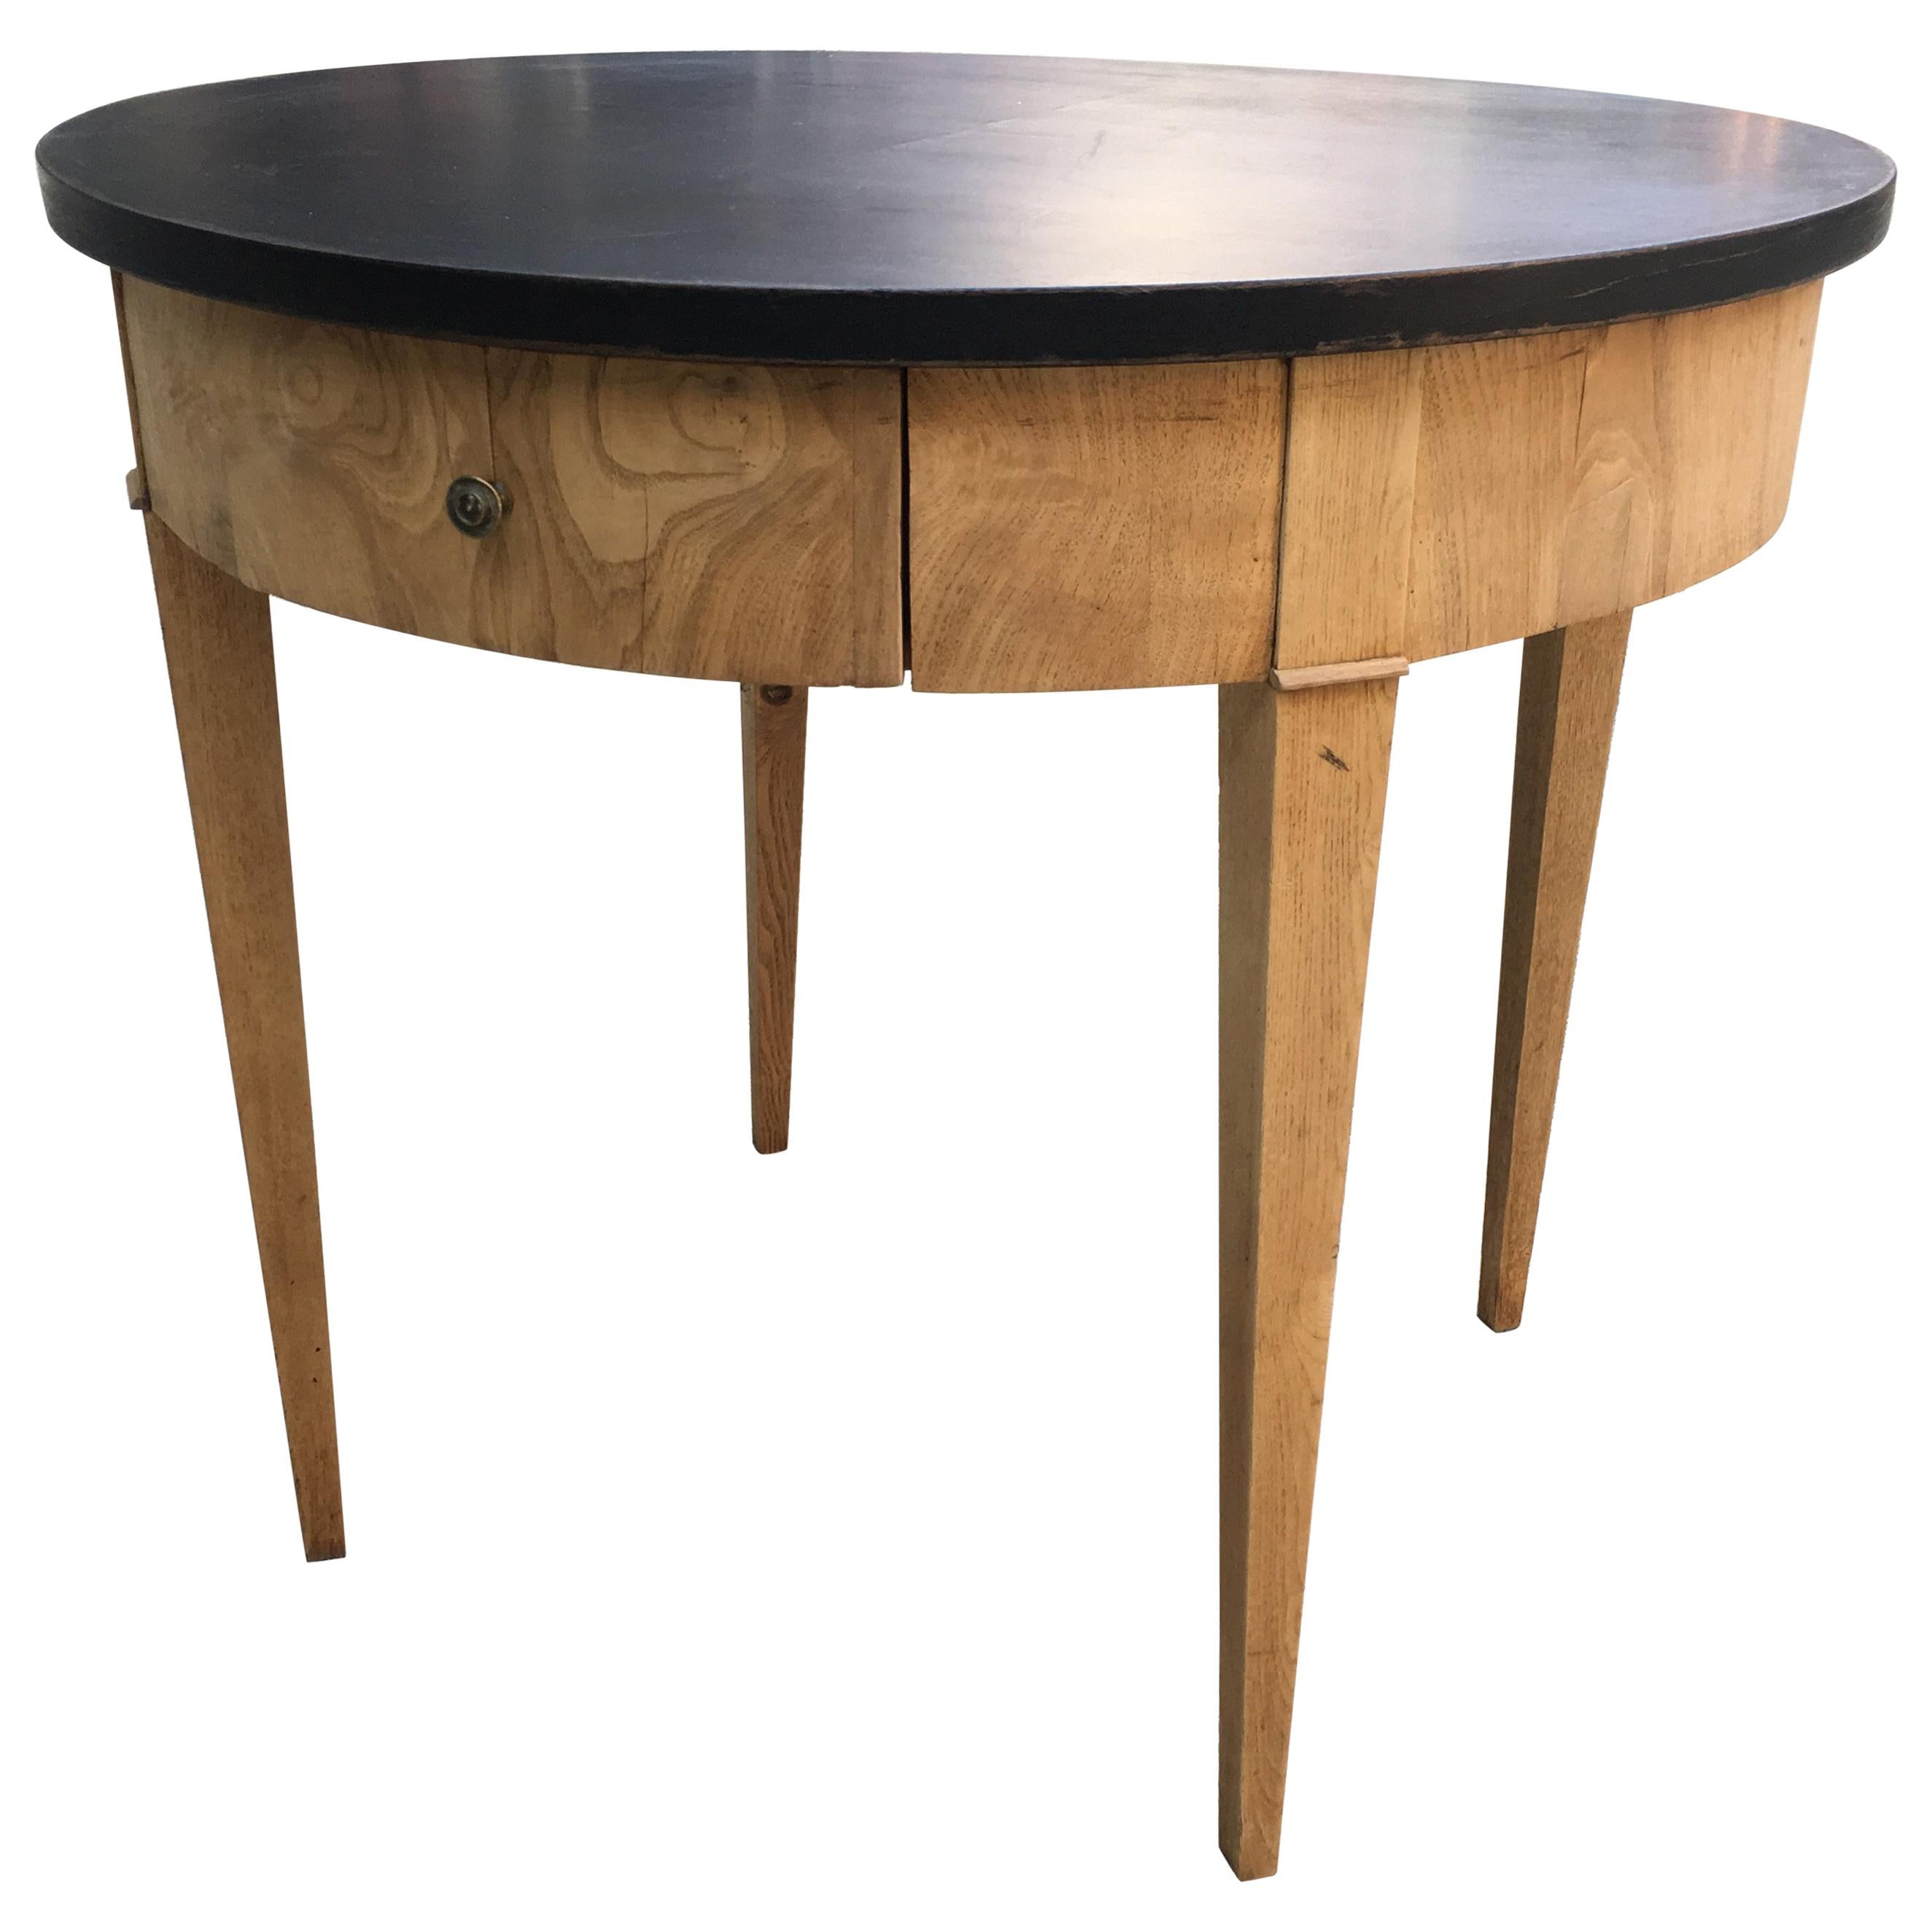 Mid-Century Modern Oak Table with Black Lacquered Top from 1950s For Sale